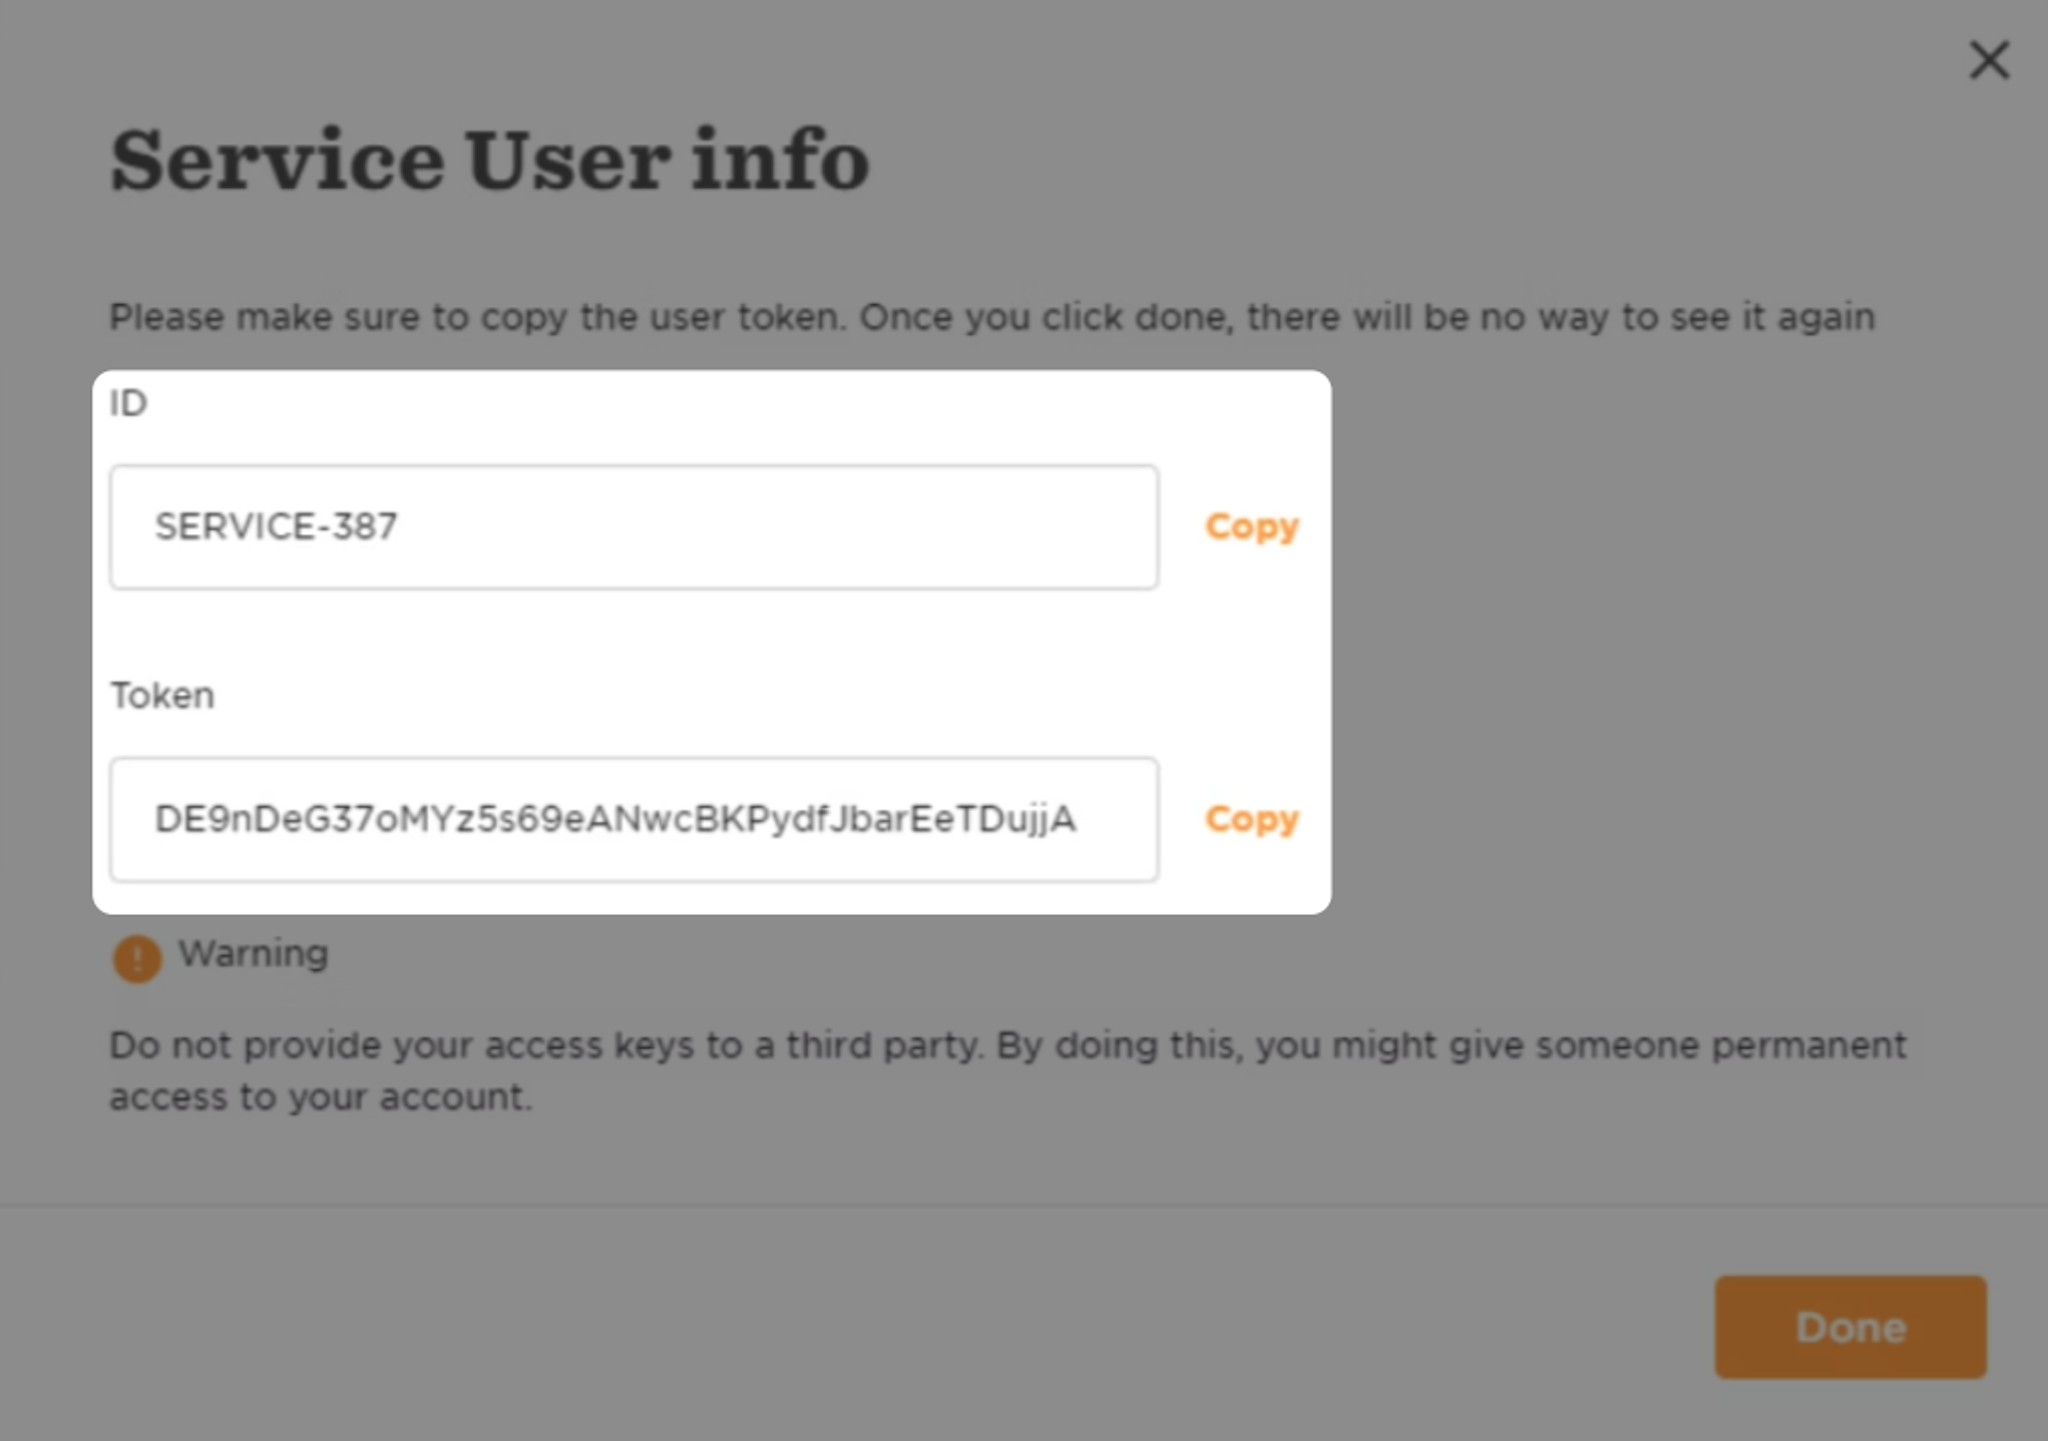 A screenshot highlighting the "ID" and "Token" fields for a Service User in the HiBob dashboard.